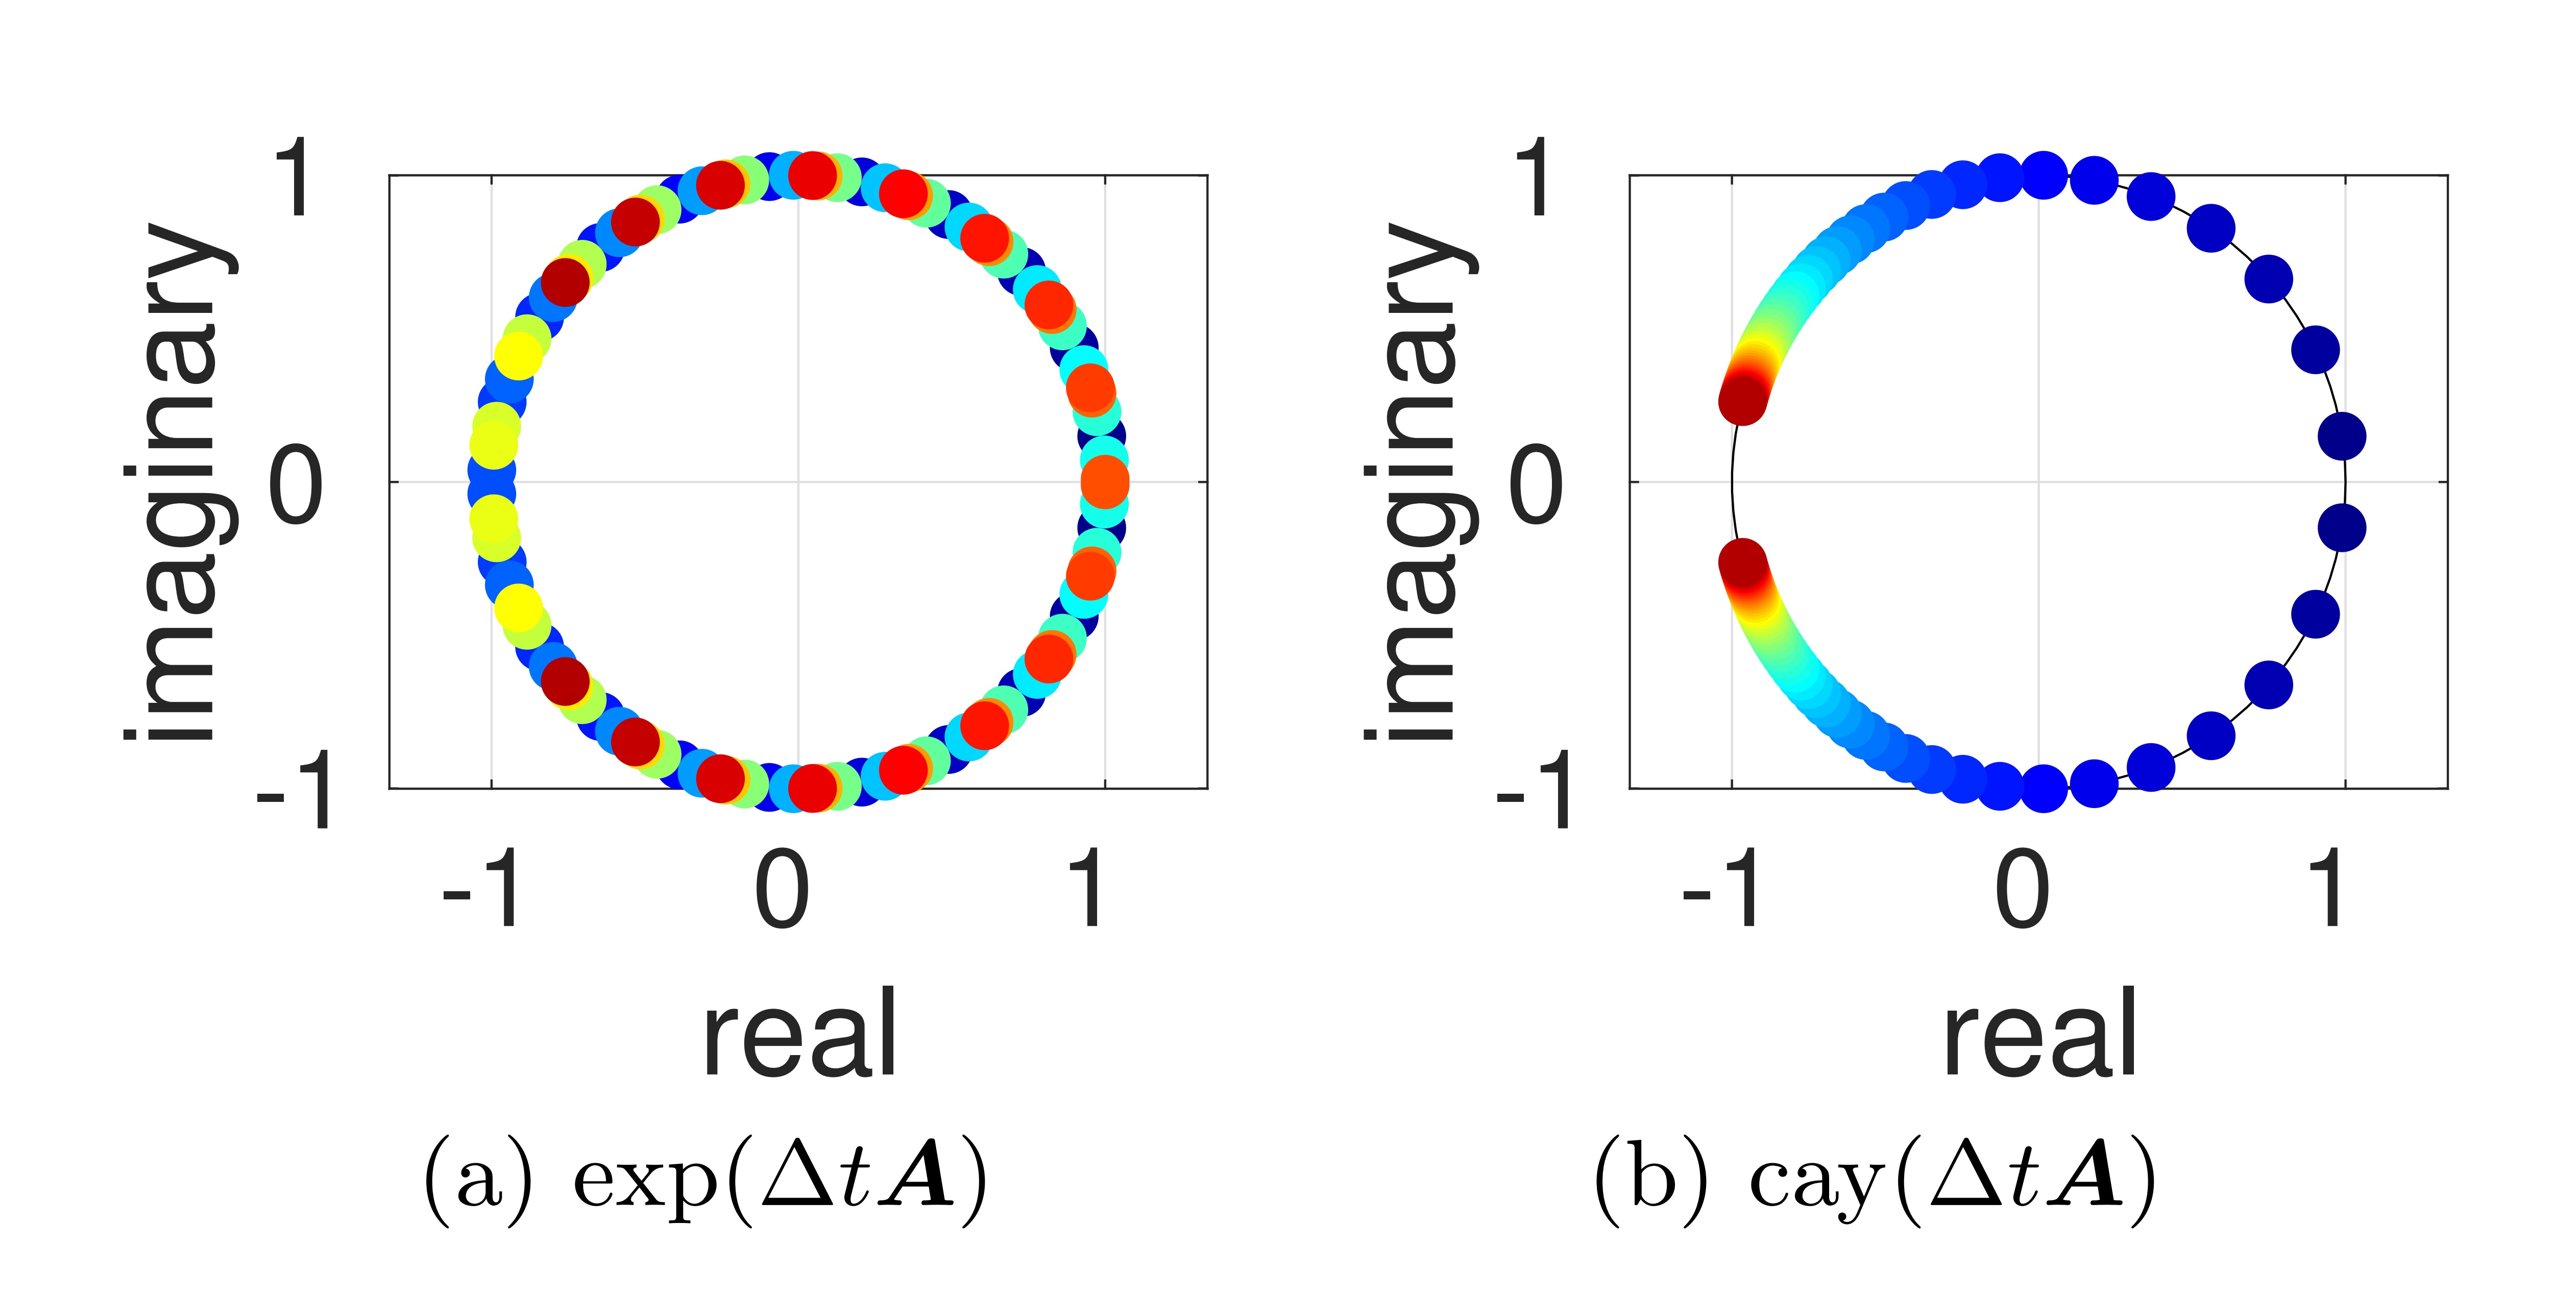 Panel A: eigenvalues of exponential propagator for different timesteps, spread uniformly 
													on the unit circle. Since the eigenvalues can be degenerate, this propagator is not strongly stable.
													Panel B: eigenvalues of the Cayley-modified propagator, at different timesteps. It is visually clear, 
													that the values become denser, never reaching the real axis. This is a visual illustration of strong stability.